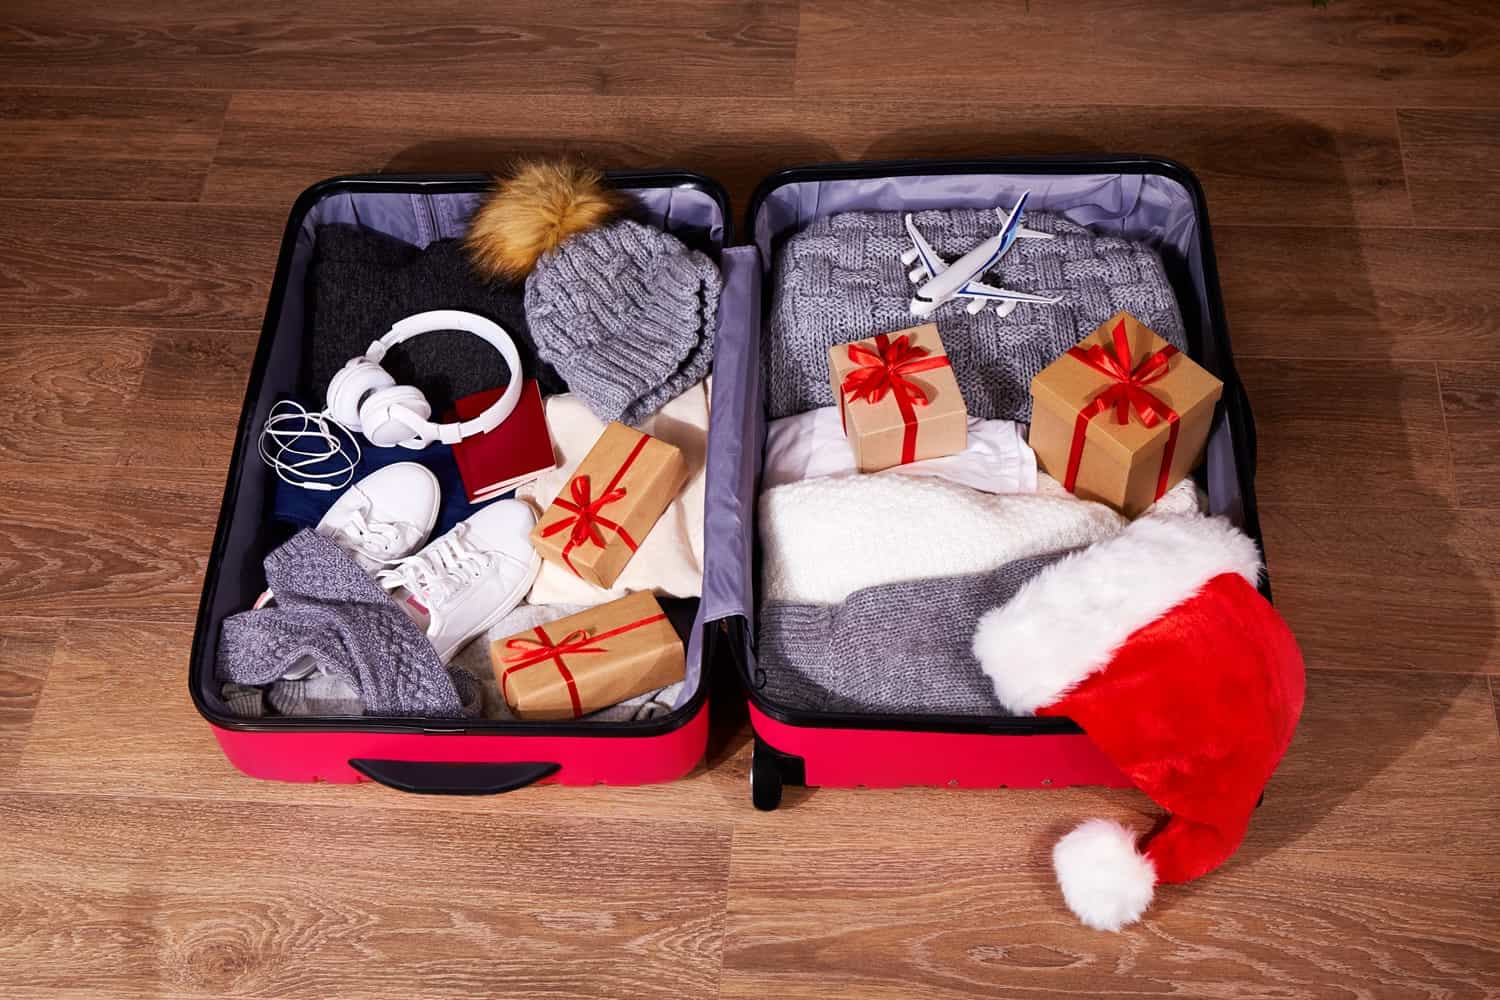 open suitcase packed with winter clothing, wrapped presents, and a holiday hat